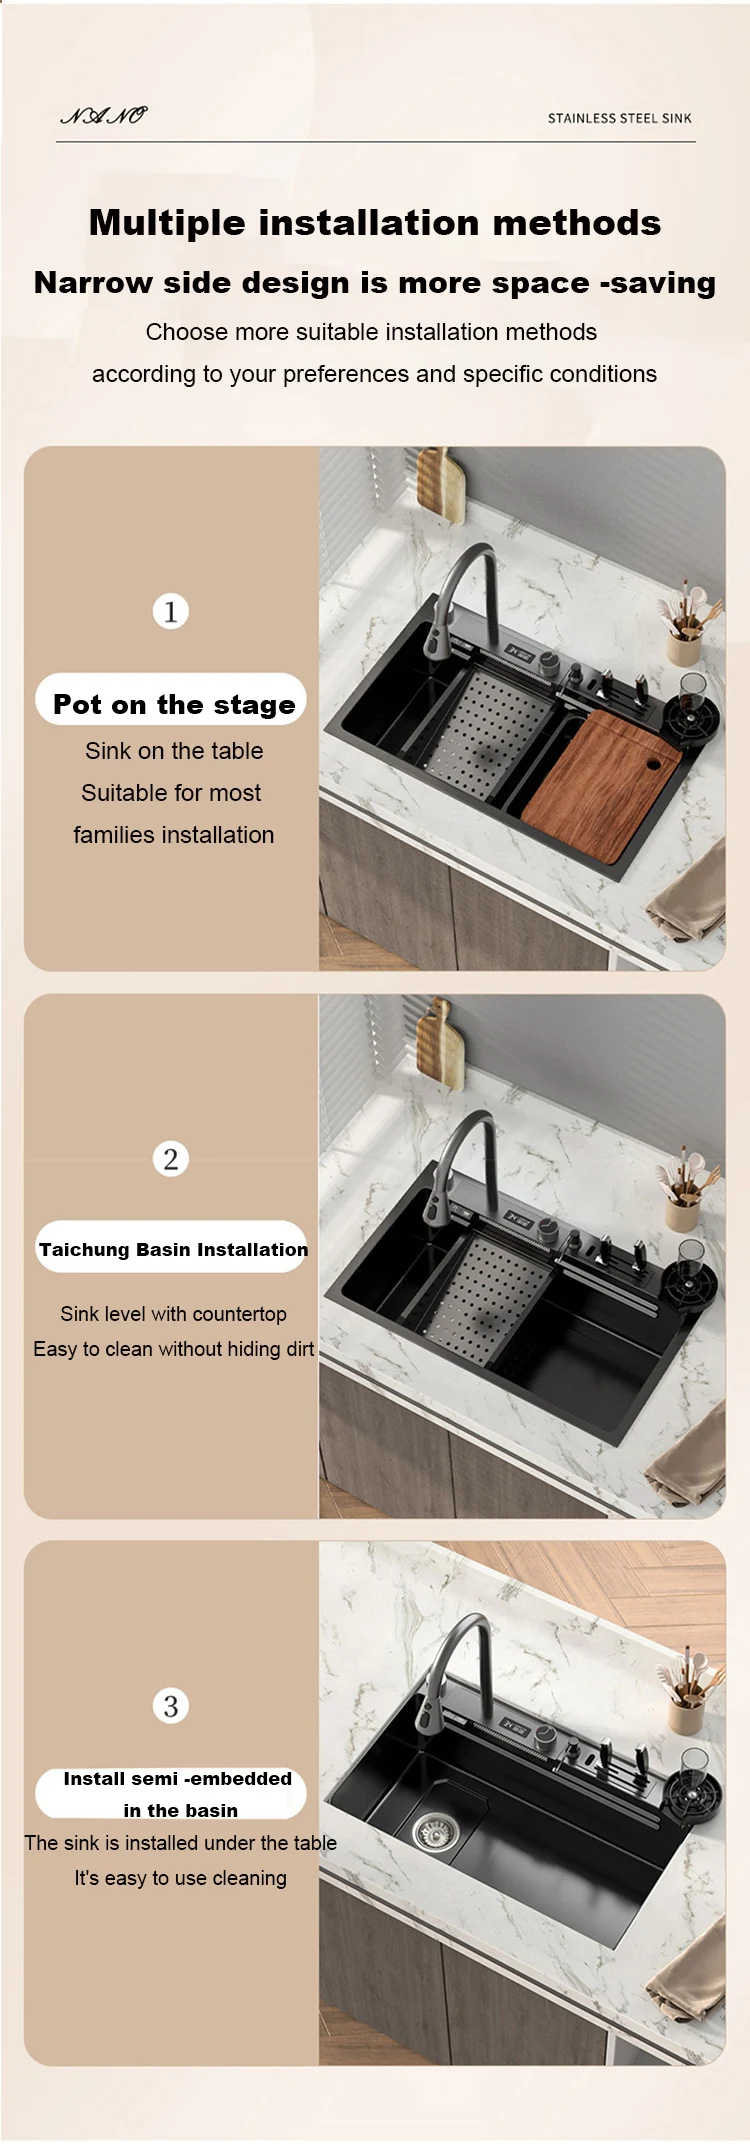 easy installation guide for Kitchen Wash Basin Sinks: Stainless Steel, Single Bowl, Undermount, ADA Compliant